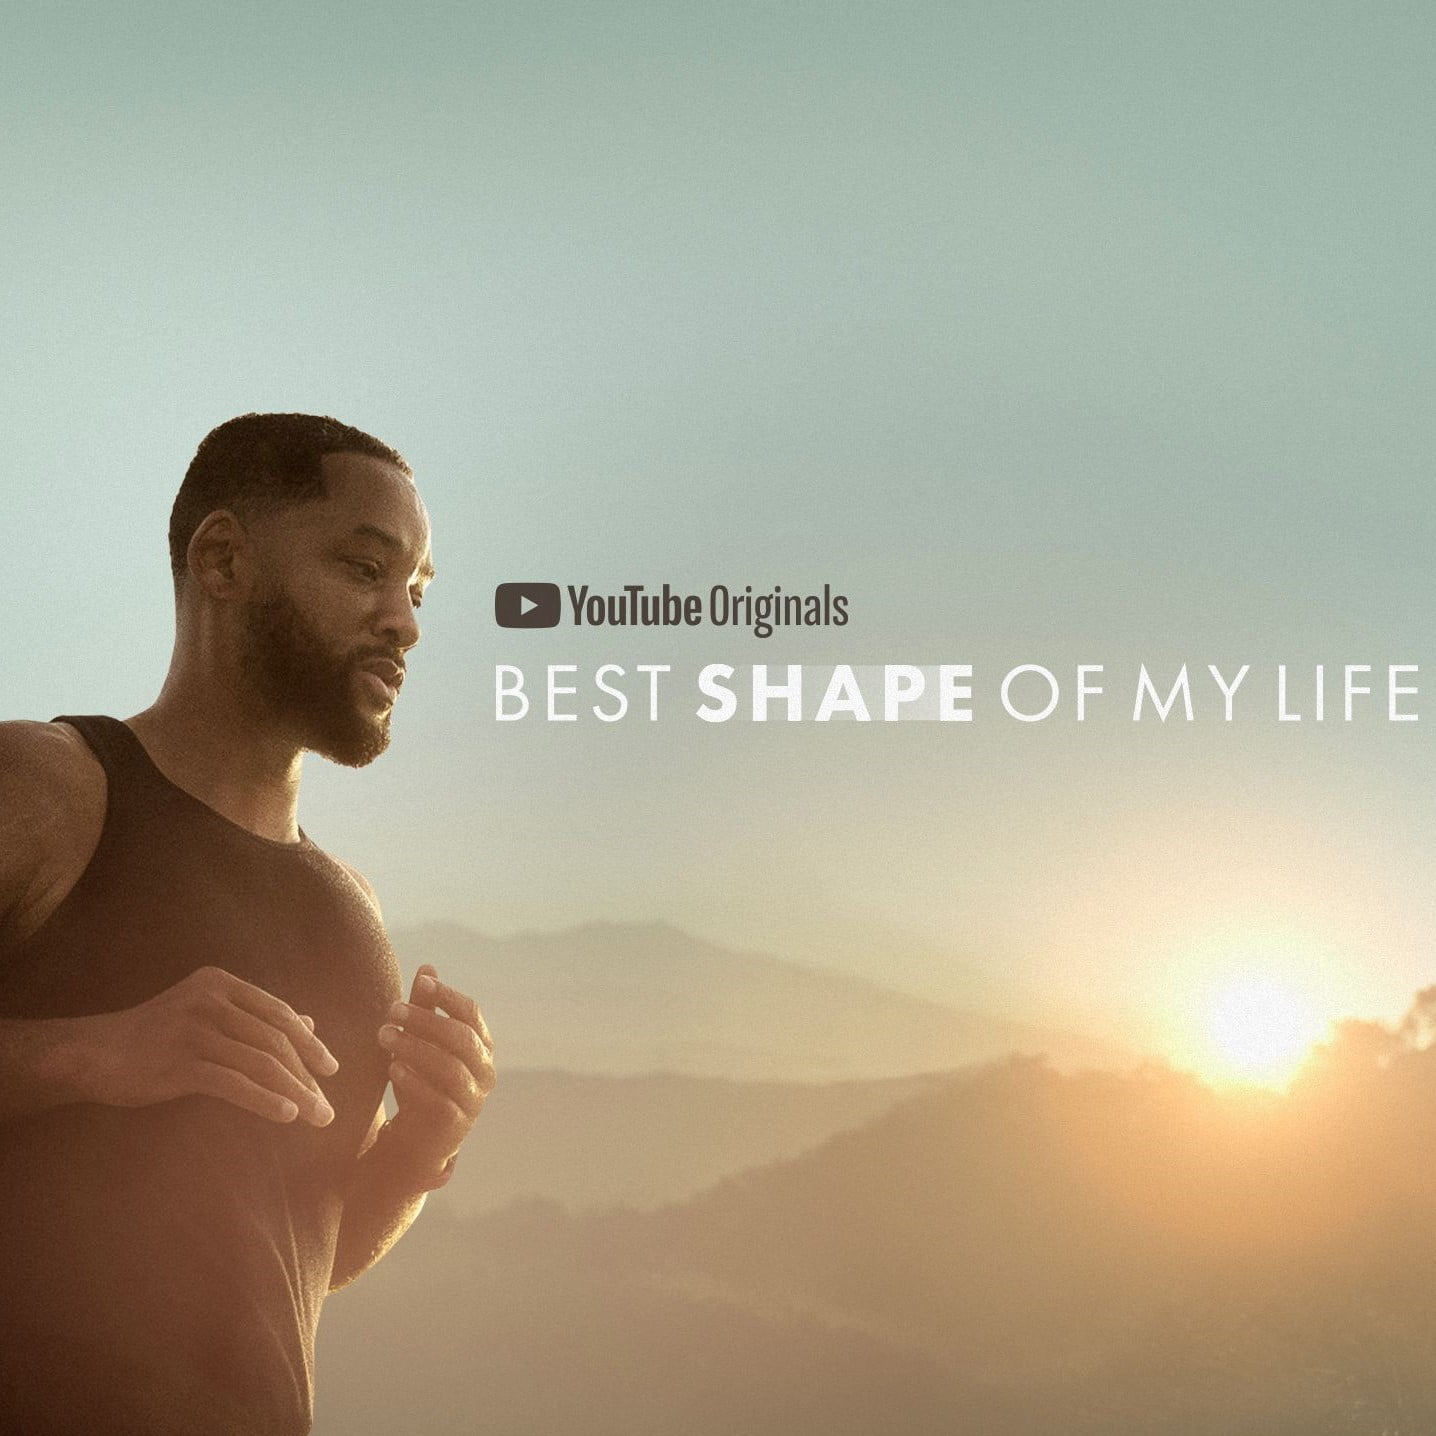 Best Shape of My Life via Youtube for use by 360 Magazine